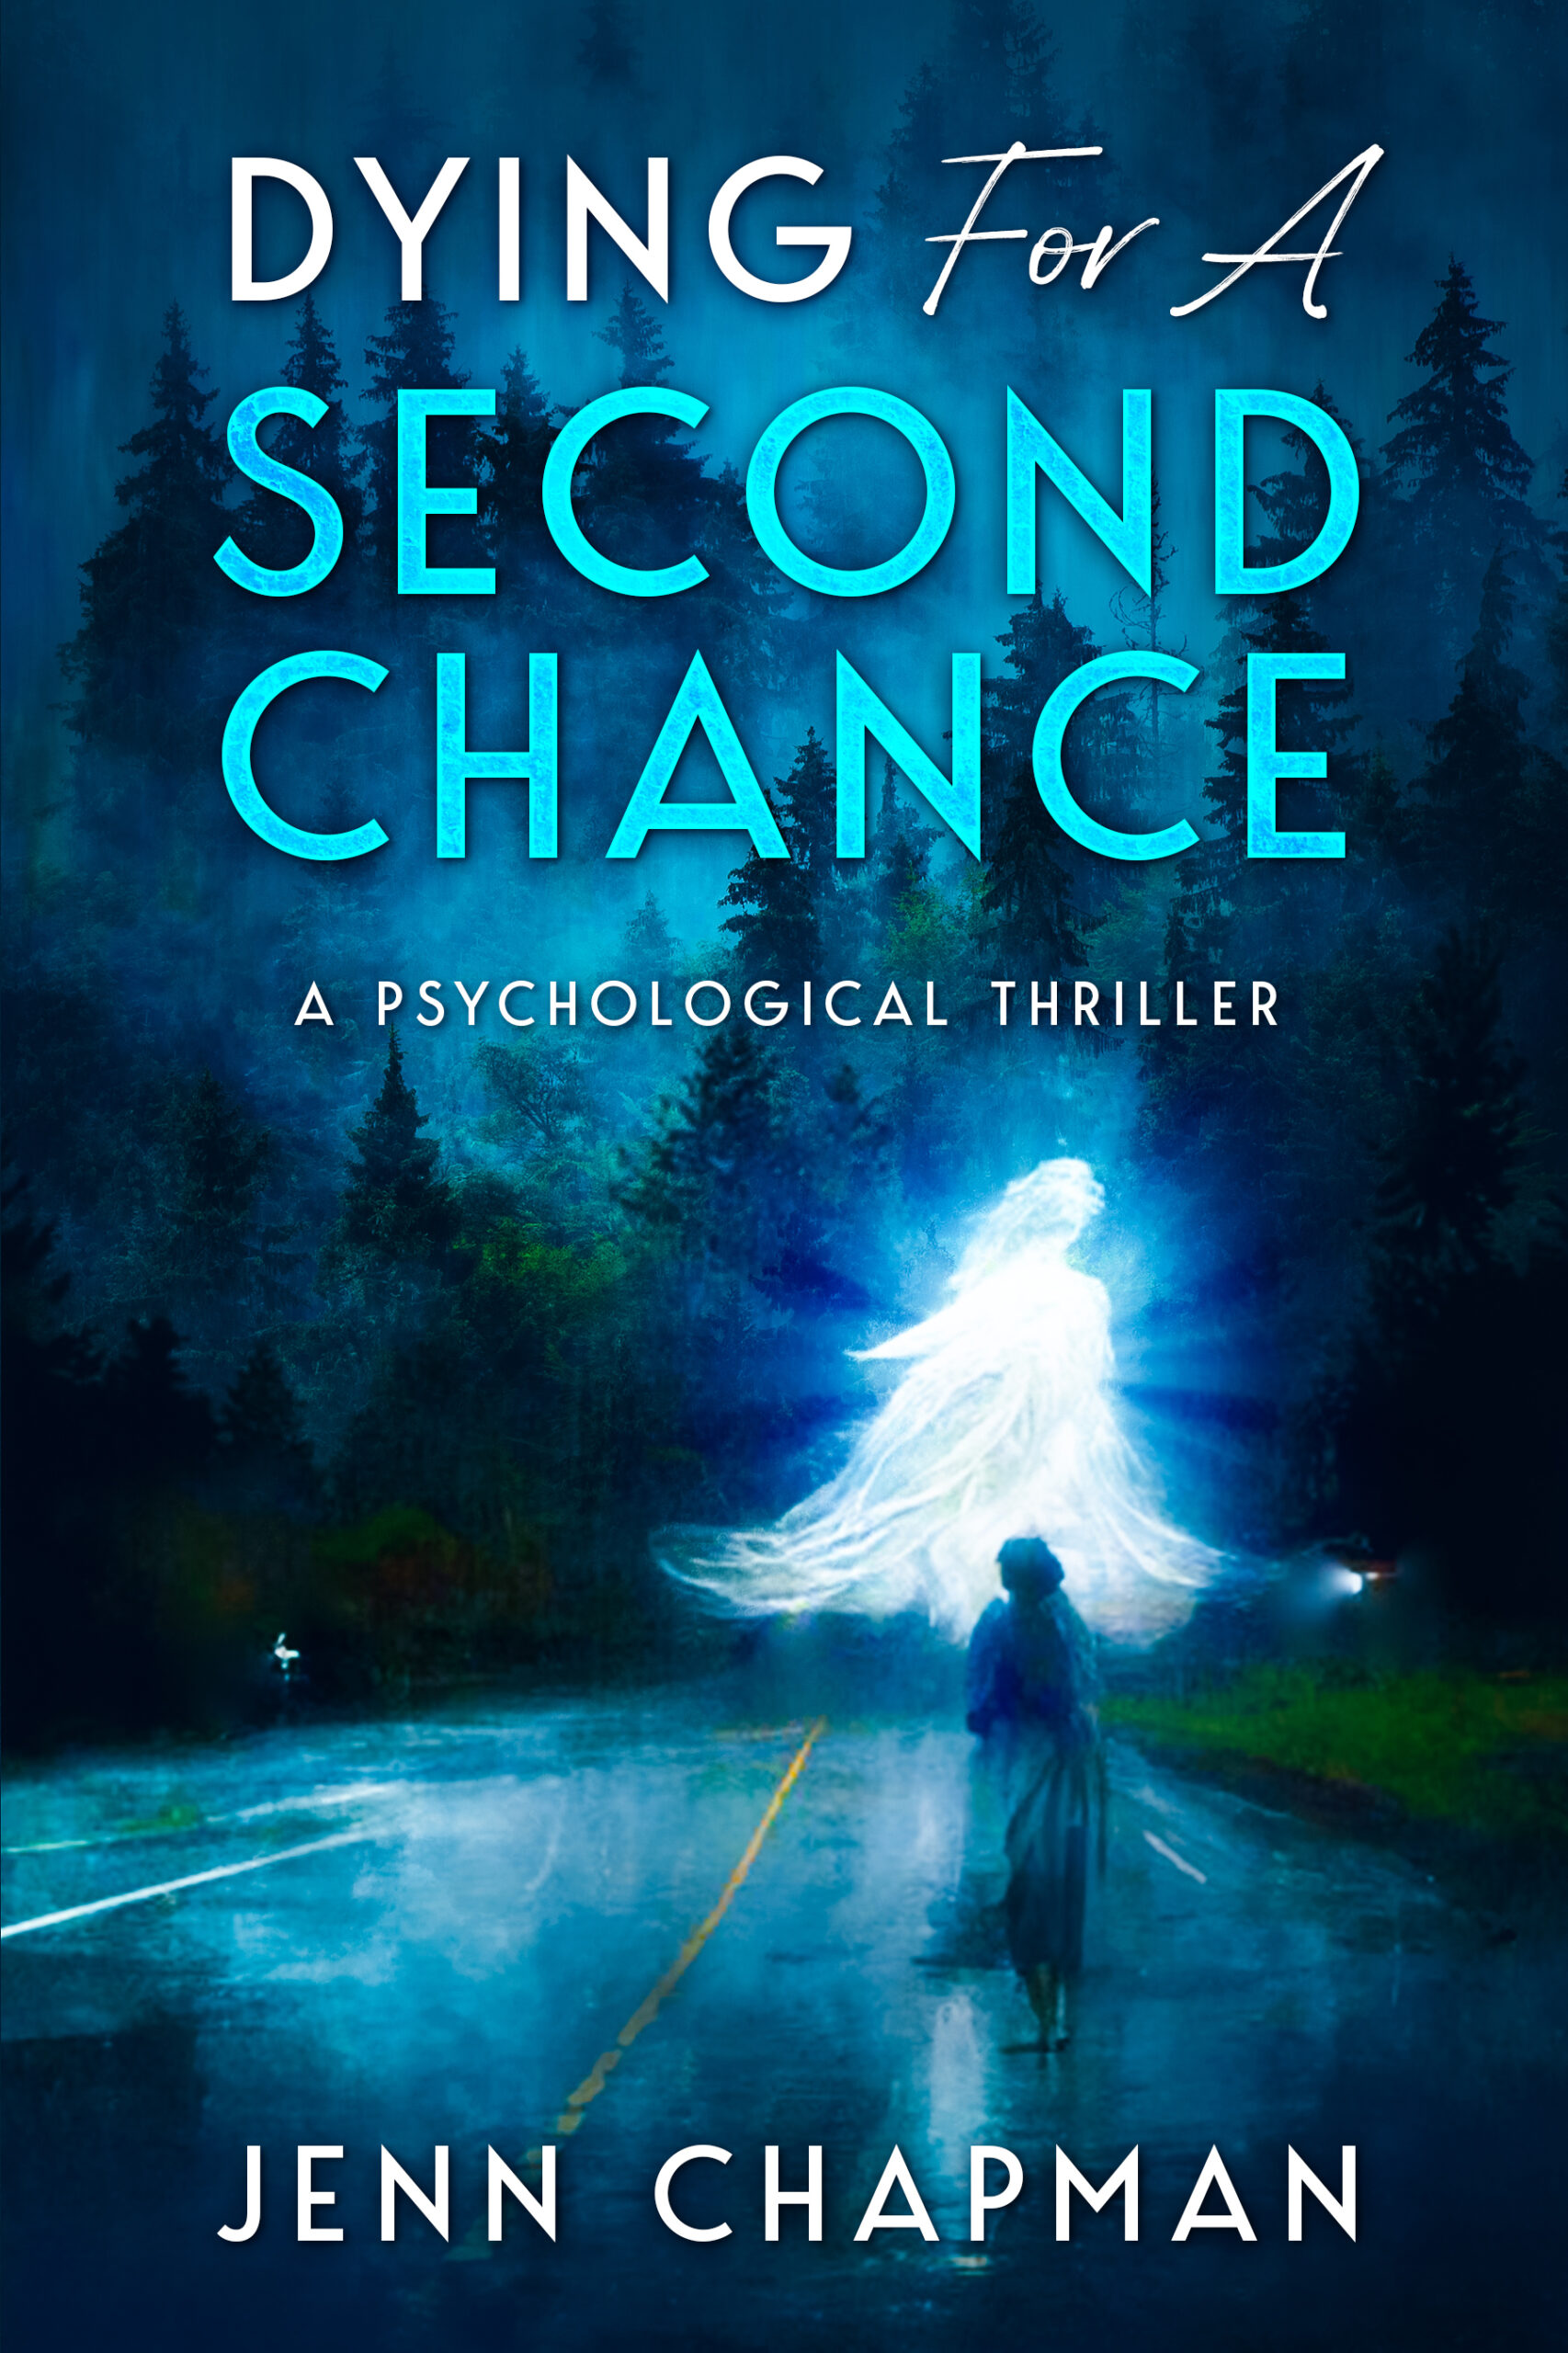 Dying for a Second Chance  by Jenn Chapman